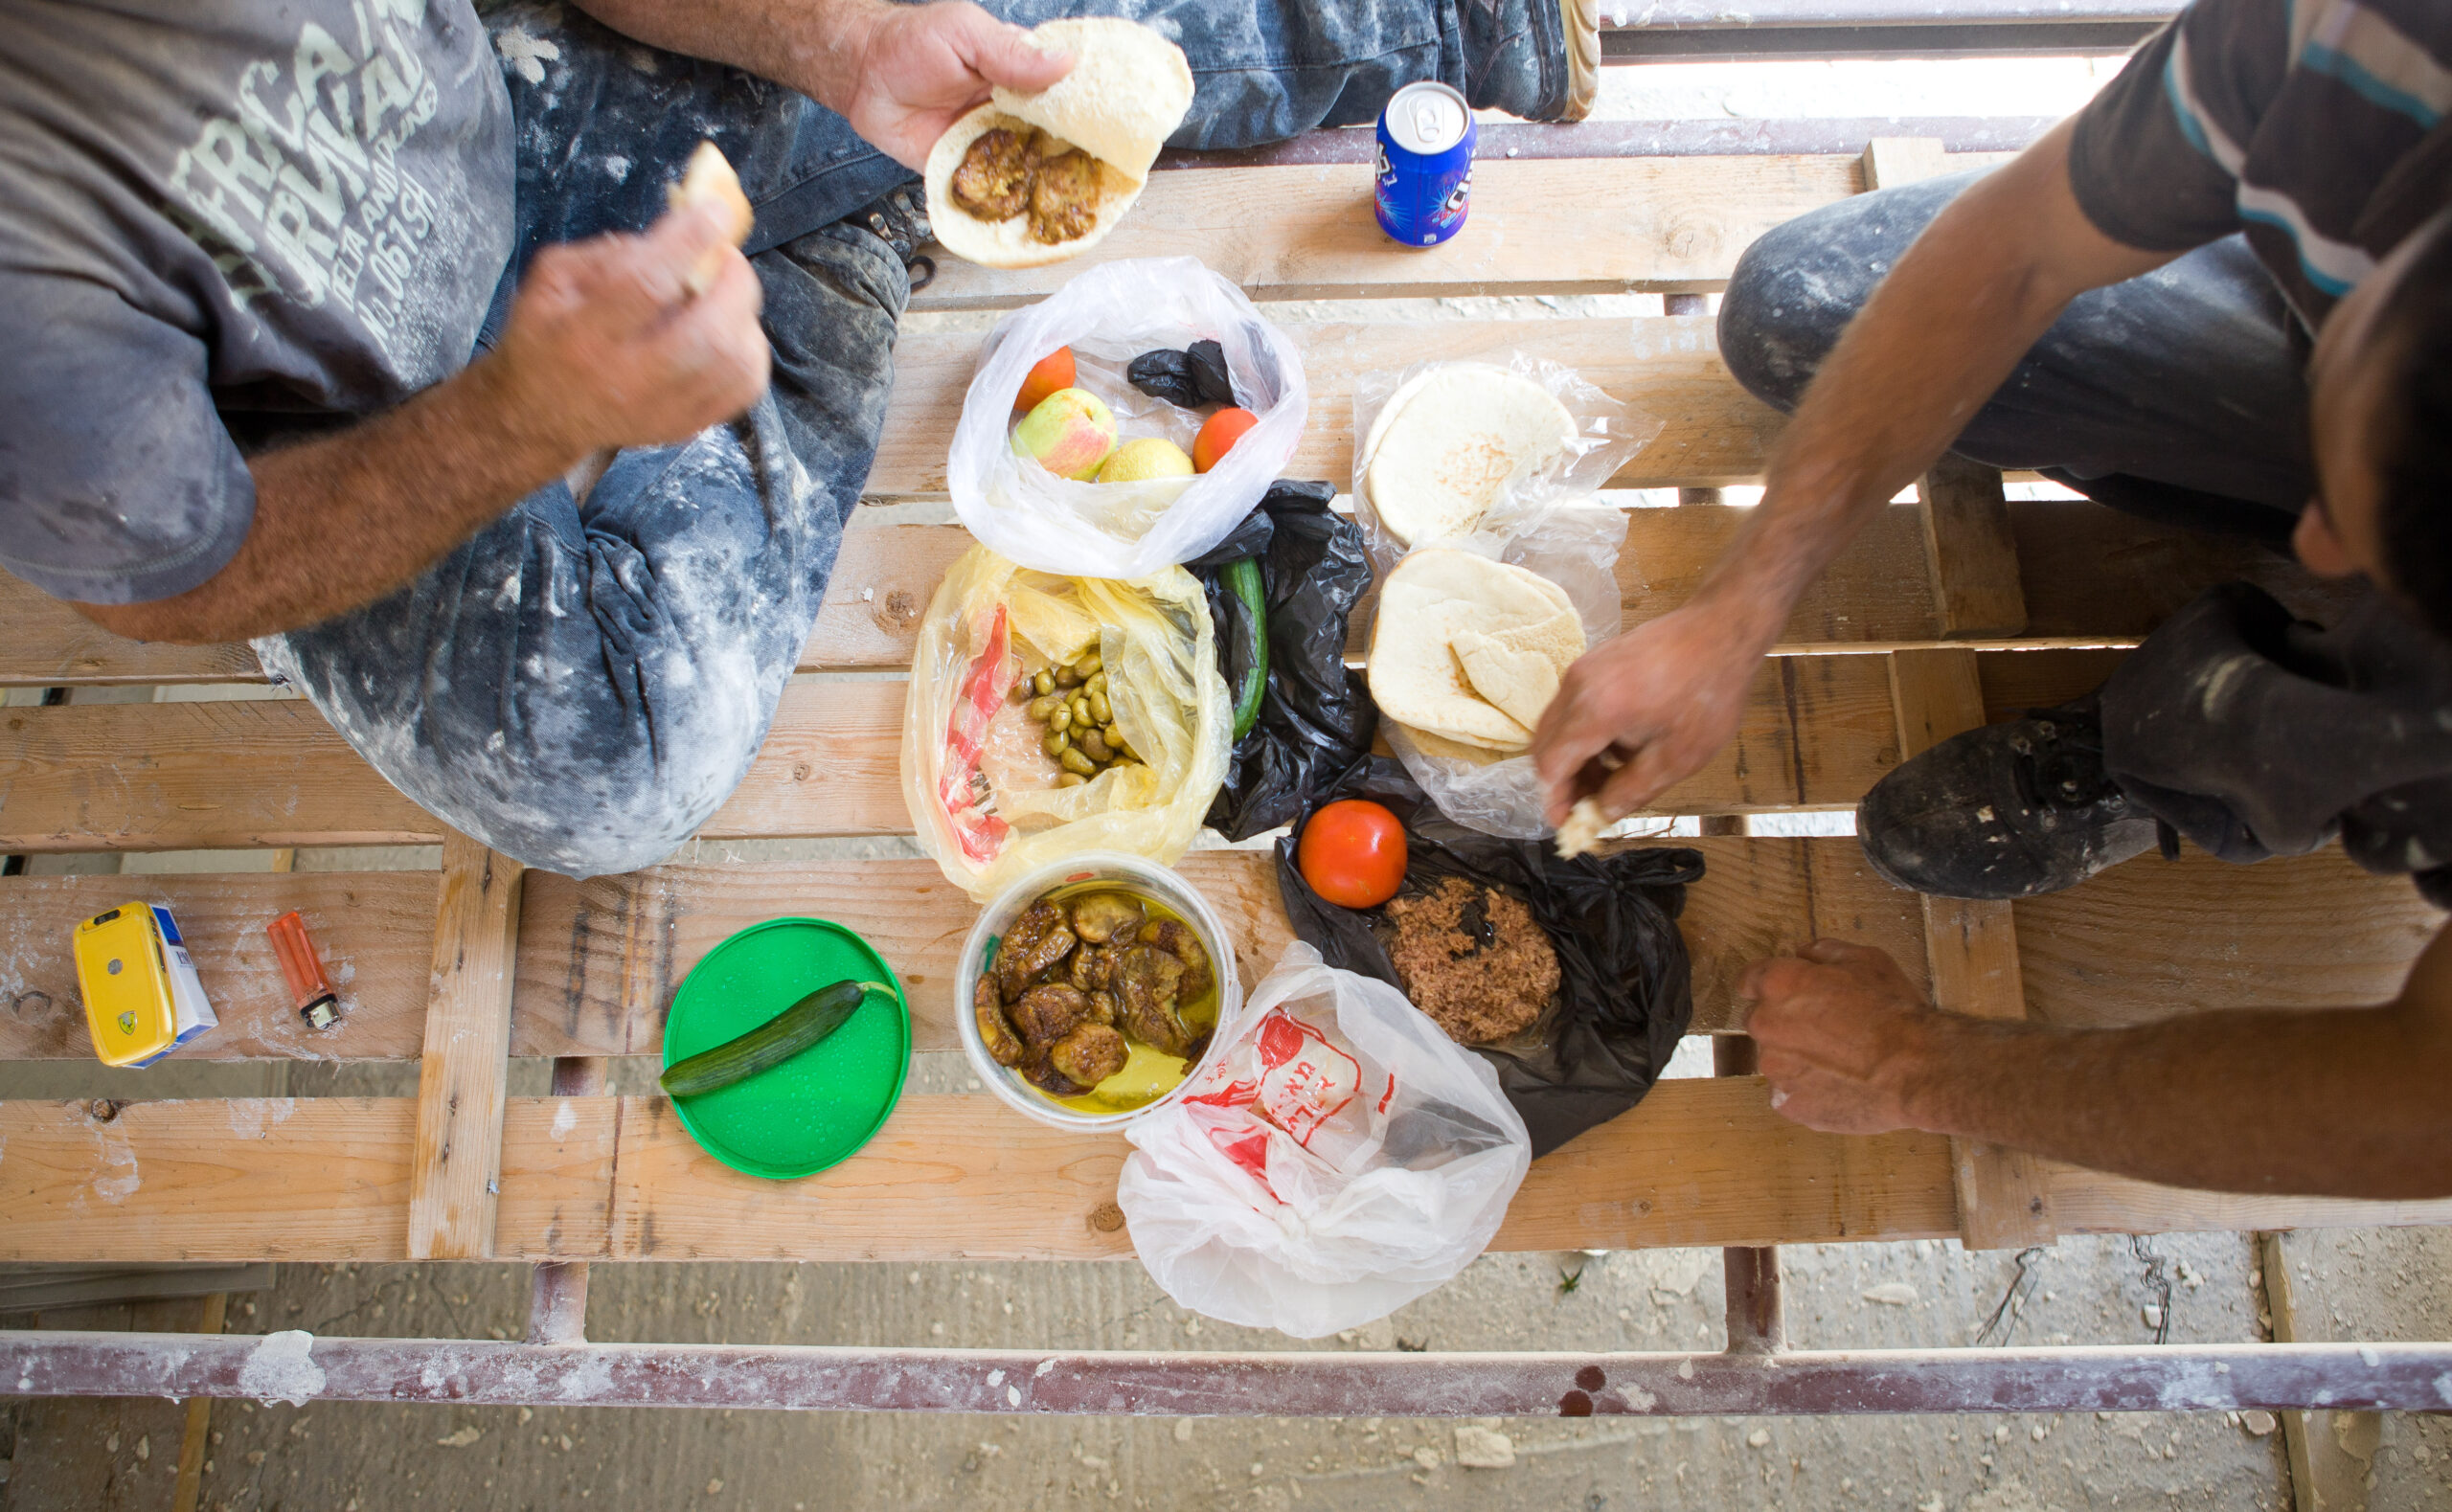 Construction workers eating a meal of olives, vegetables, and pita